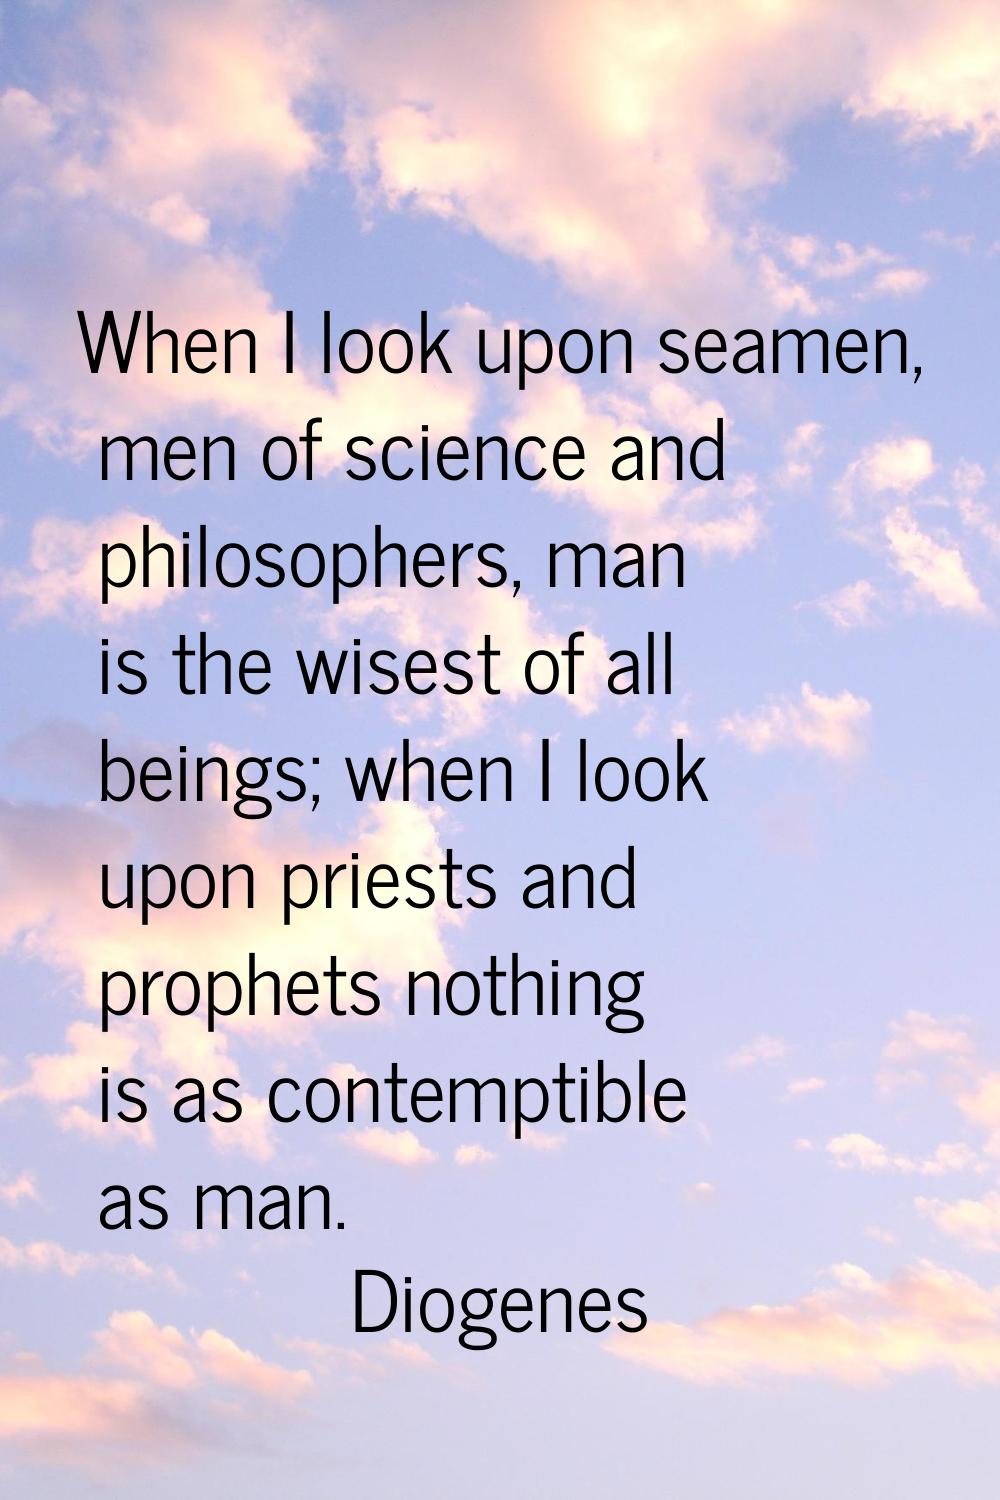 When I look upon seamen, men of science and philosophers, man is the wisest of all beings; when I l